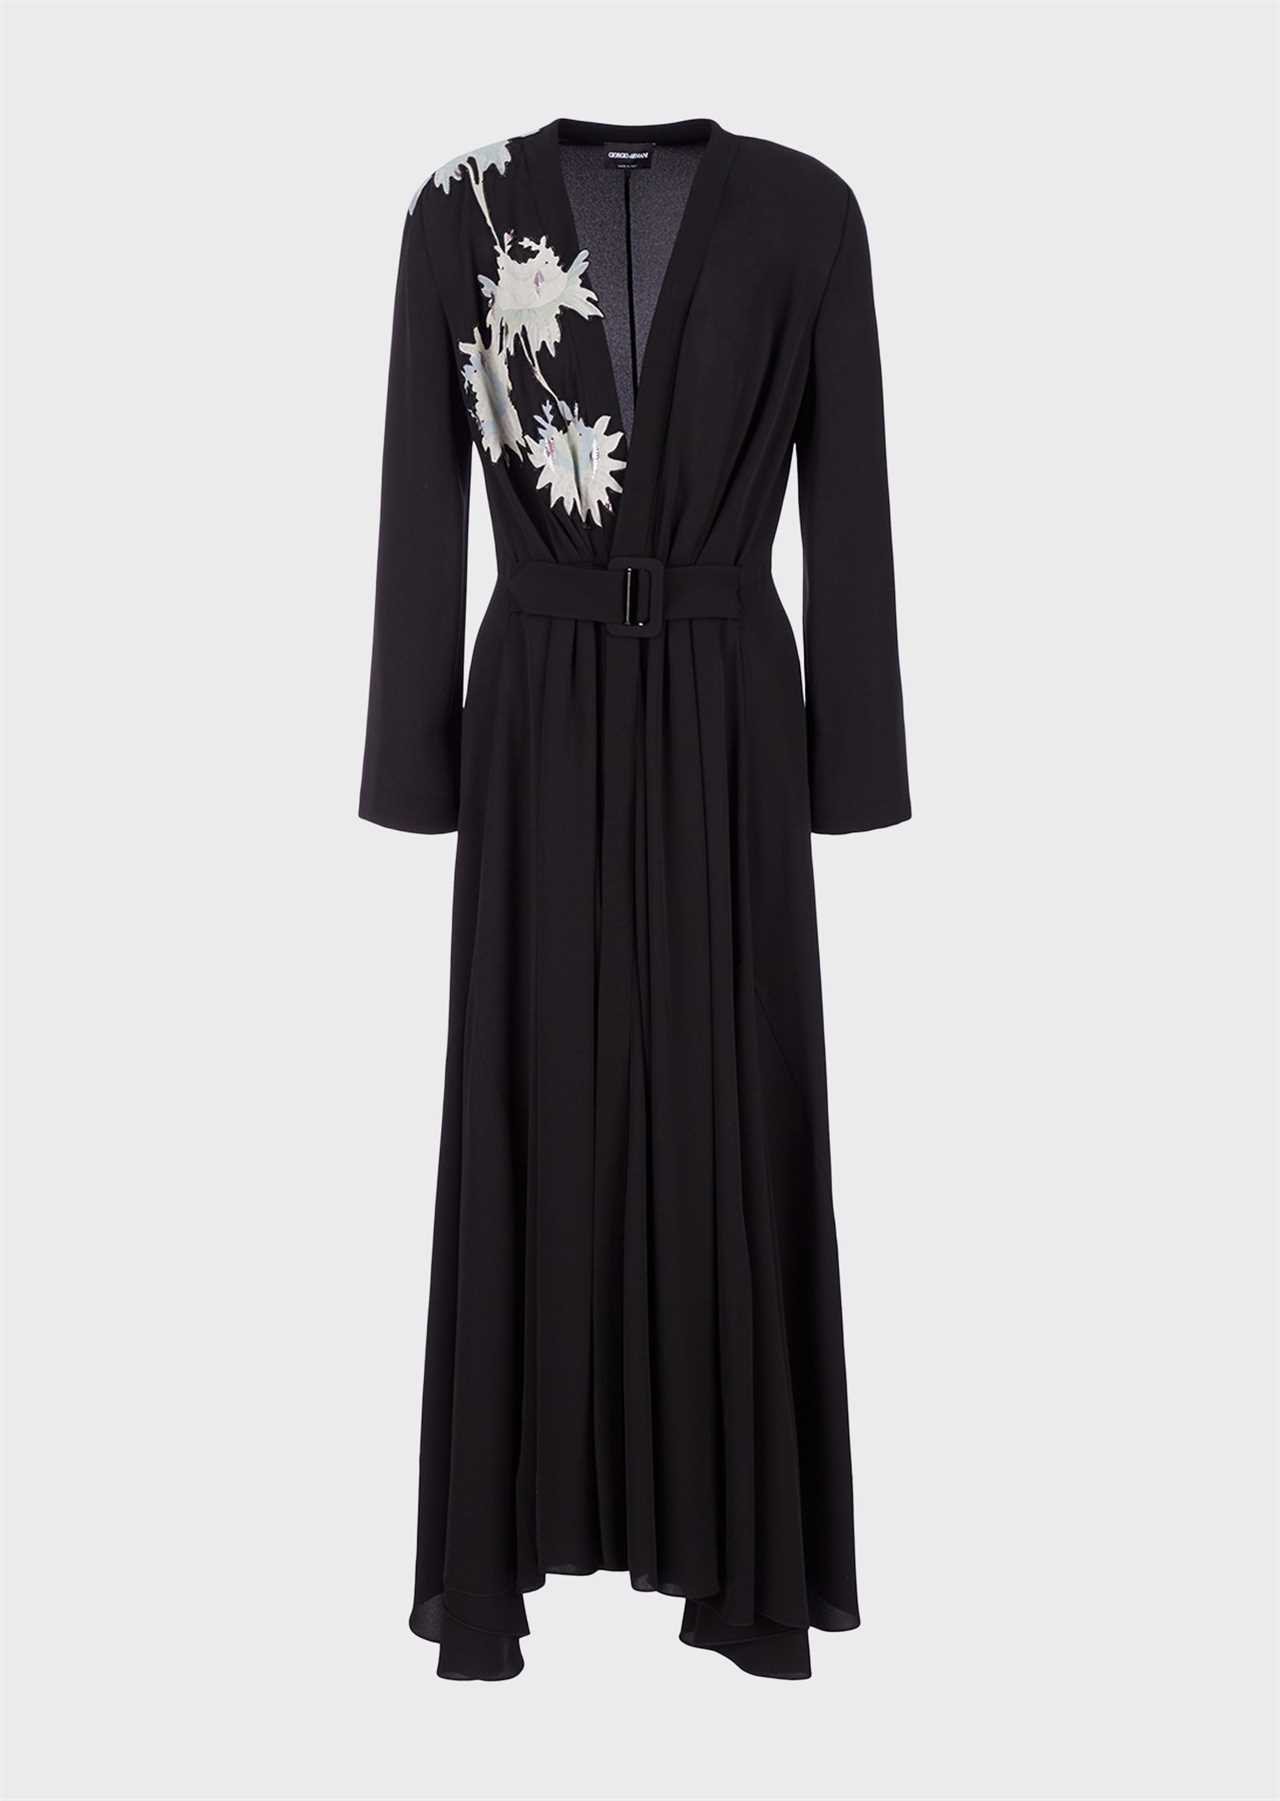 Meghan's £3,300 long triple silk dress features a lotus flower design, which Meghan chose for its “symbolic meaning of revival”, it has been claimed